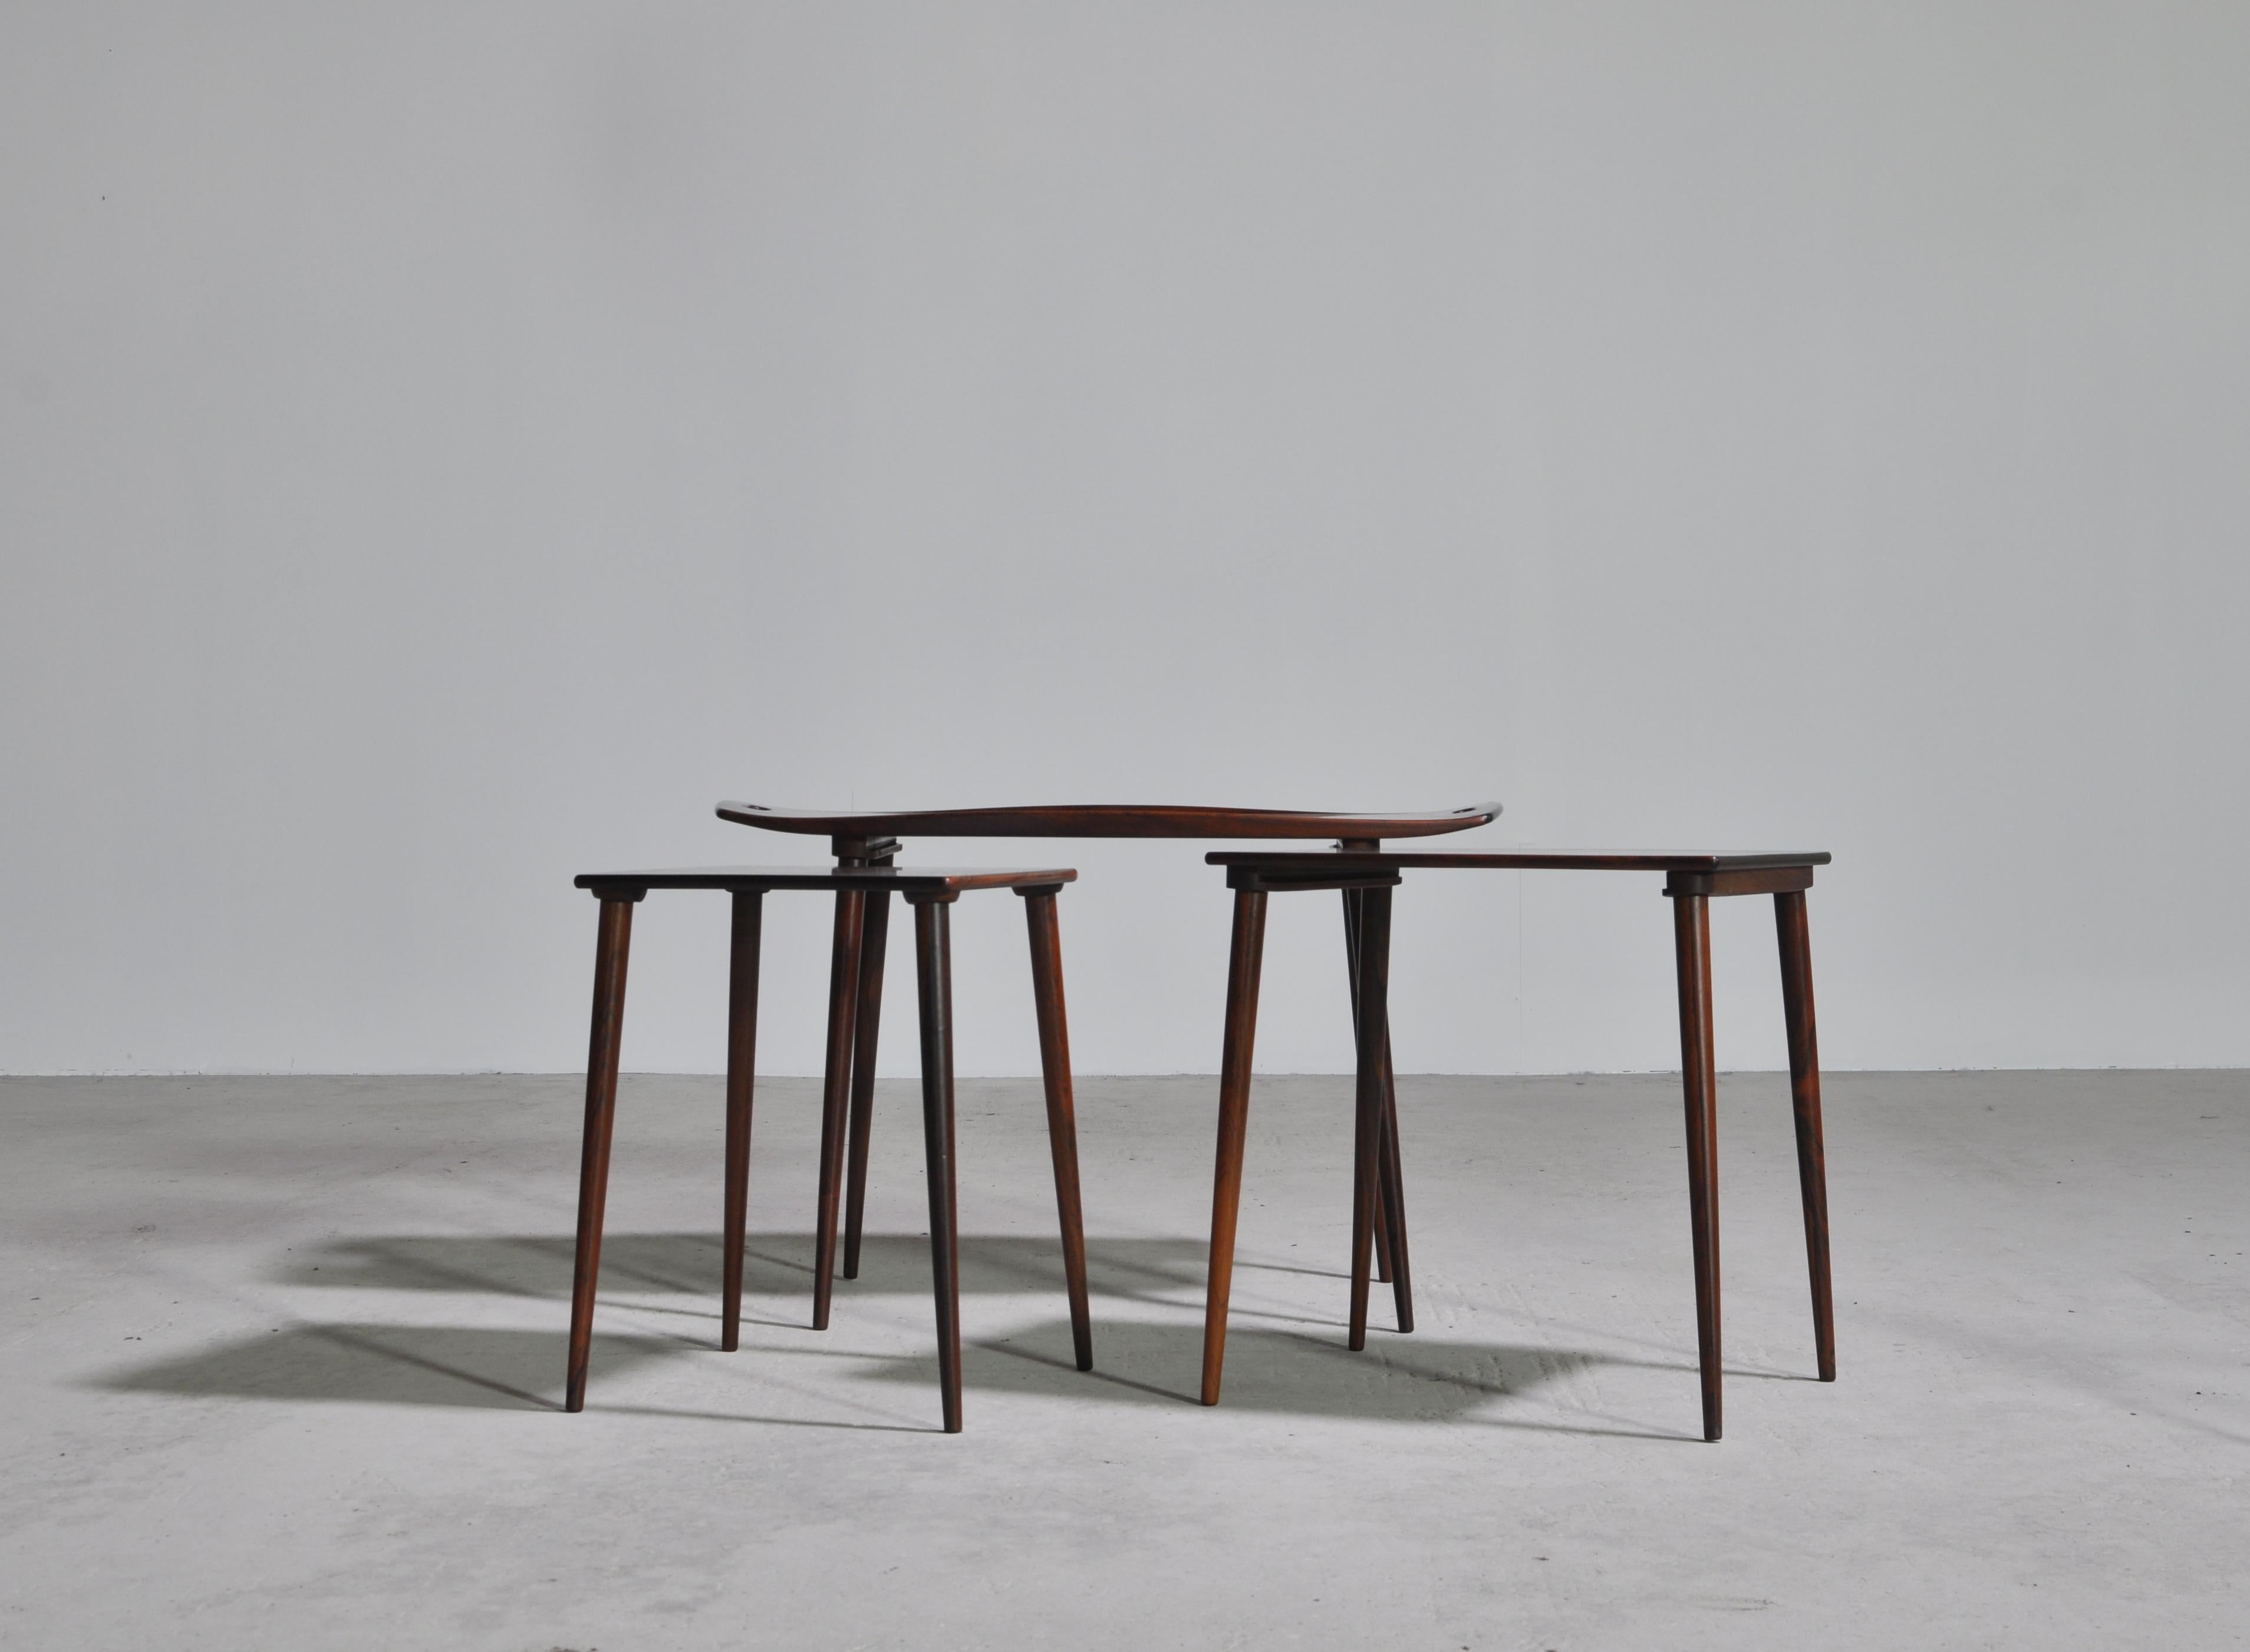 Highly detailed and beautiful rosewood nesting tables with serving tray handles designed by Jens Quistgaard for Richard Nissen. The sculpted top of the largest table features finger cut-outs at each end, raised edges and slender, tapered legs. A